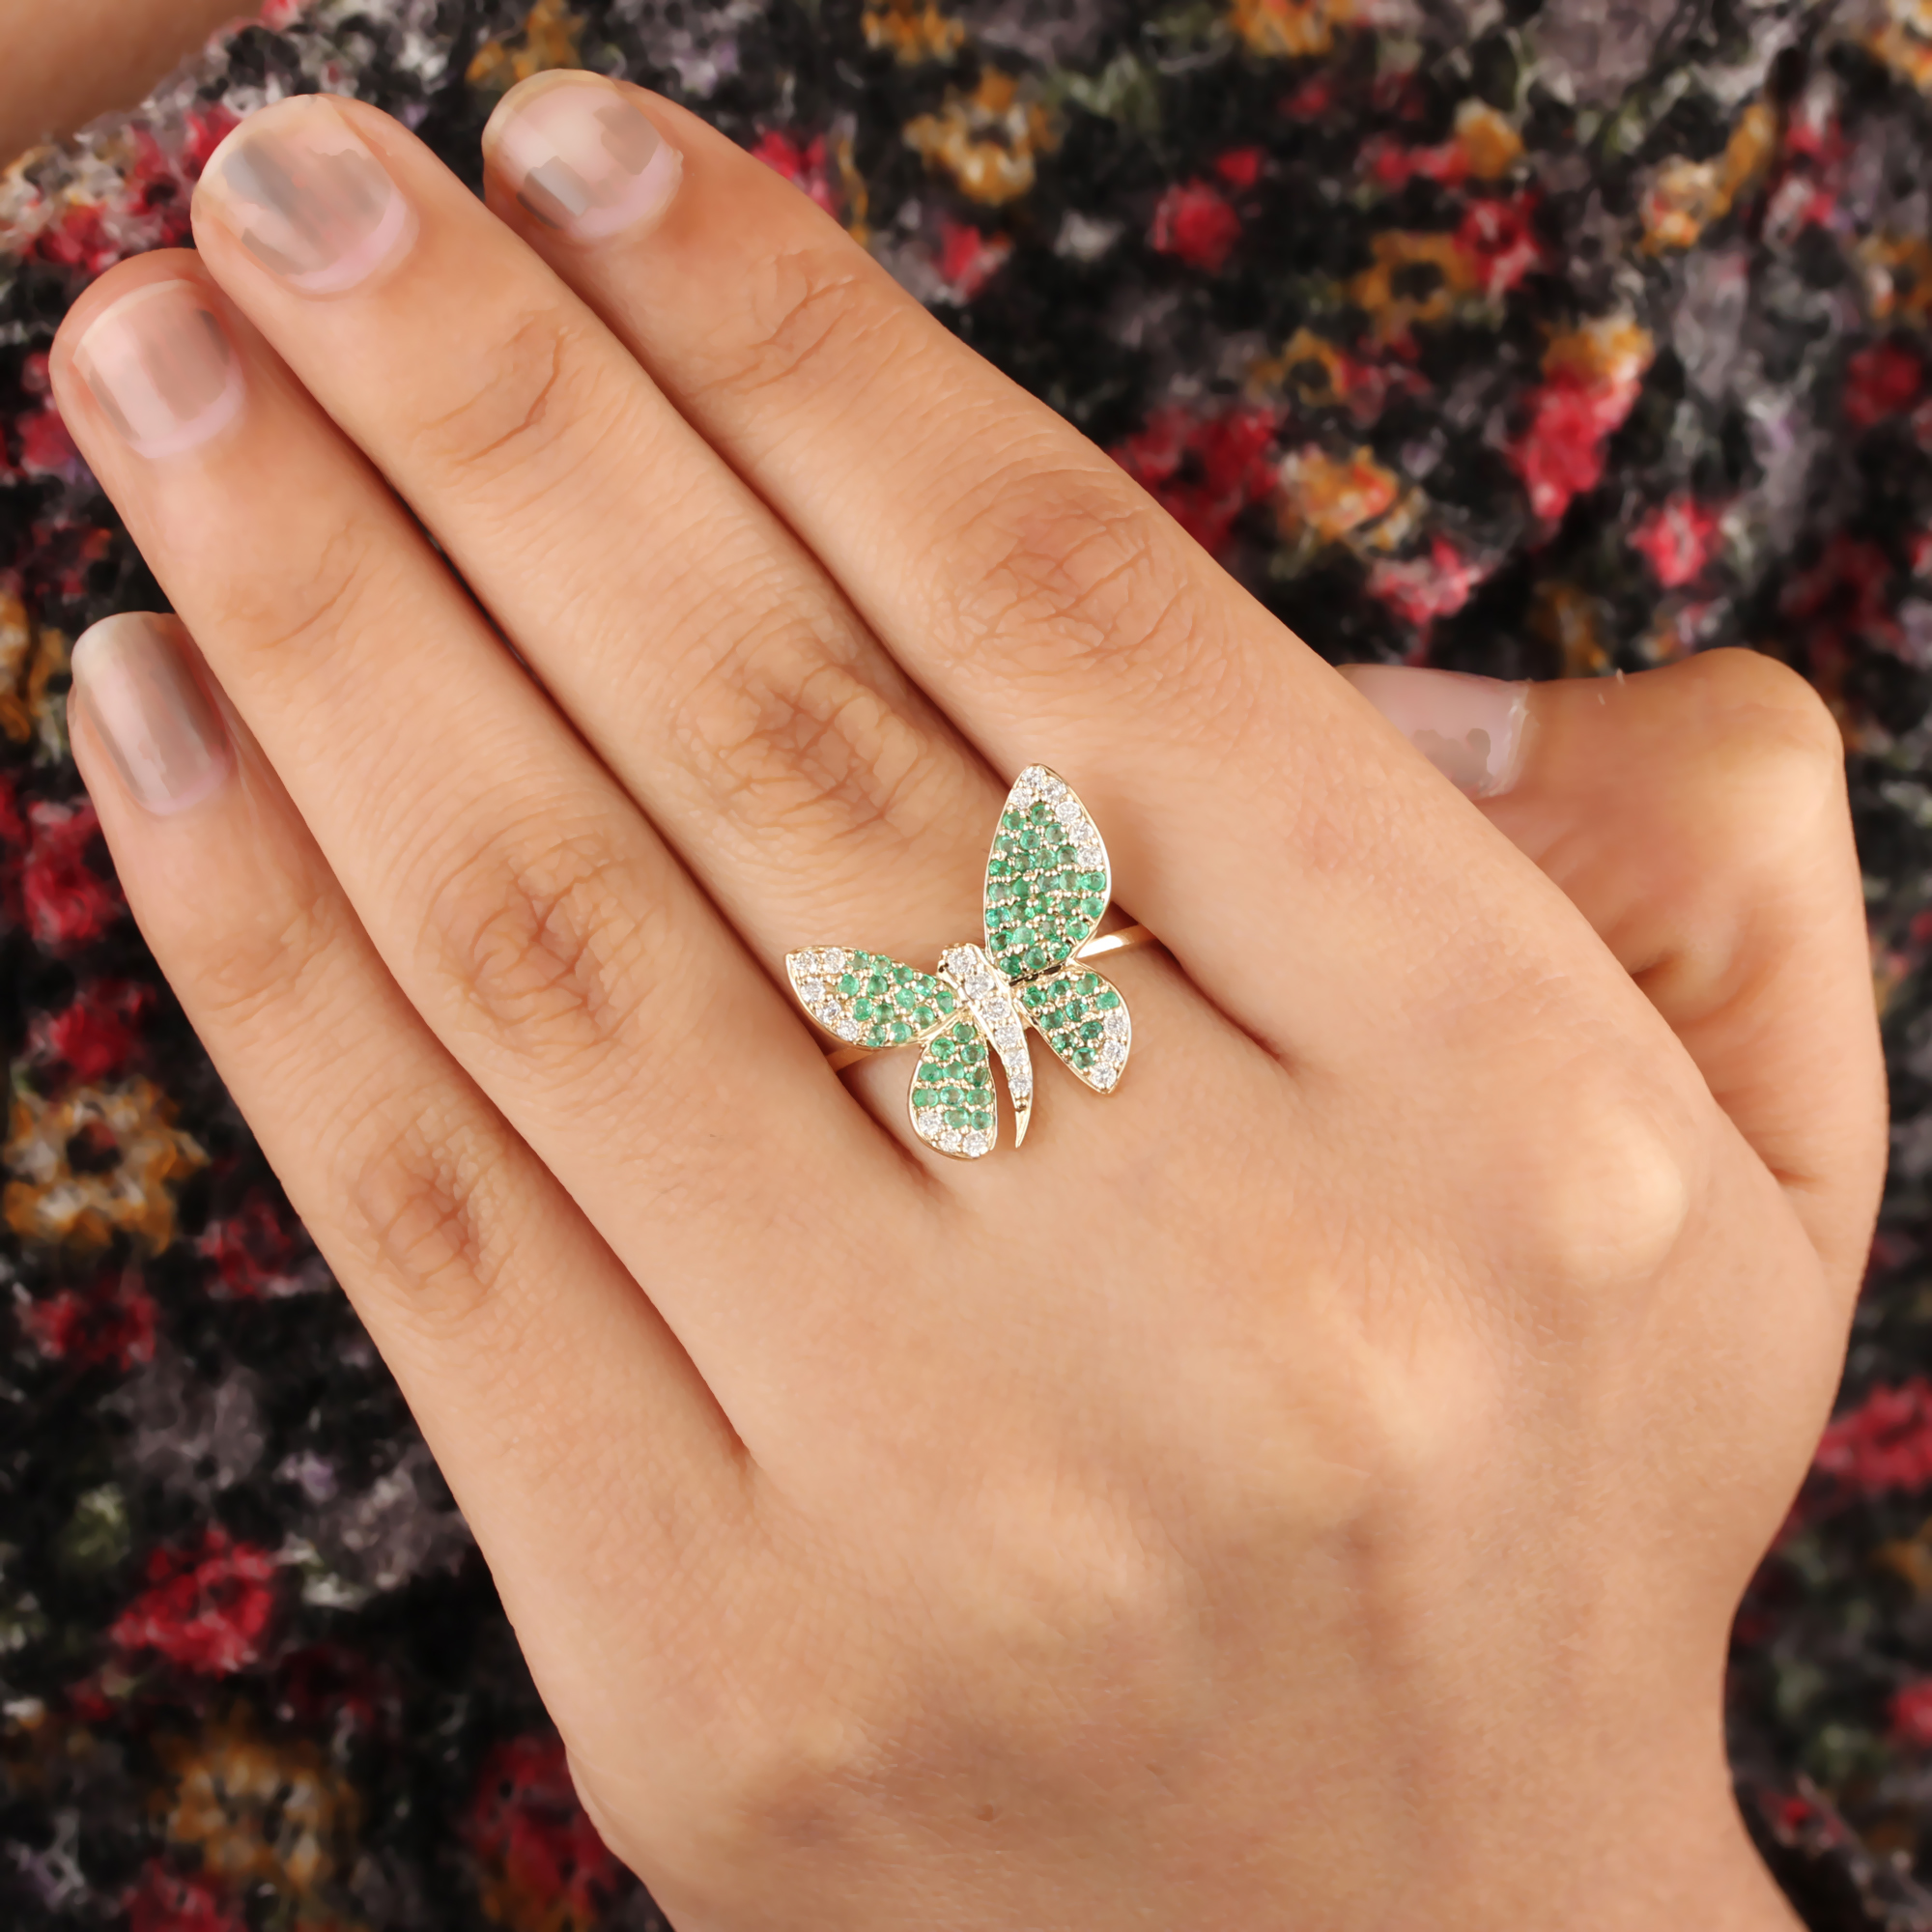 Emerald Gemstone Ring Butterfly Ring 14K Solid Gold Pave Diamond Jewelry